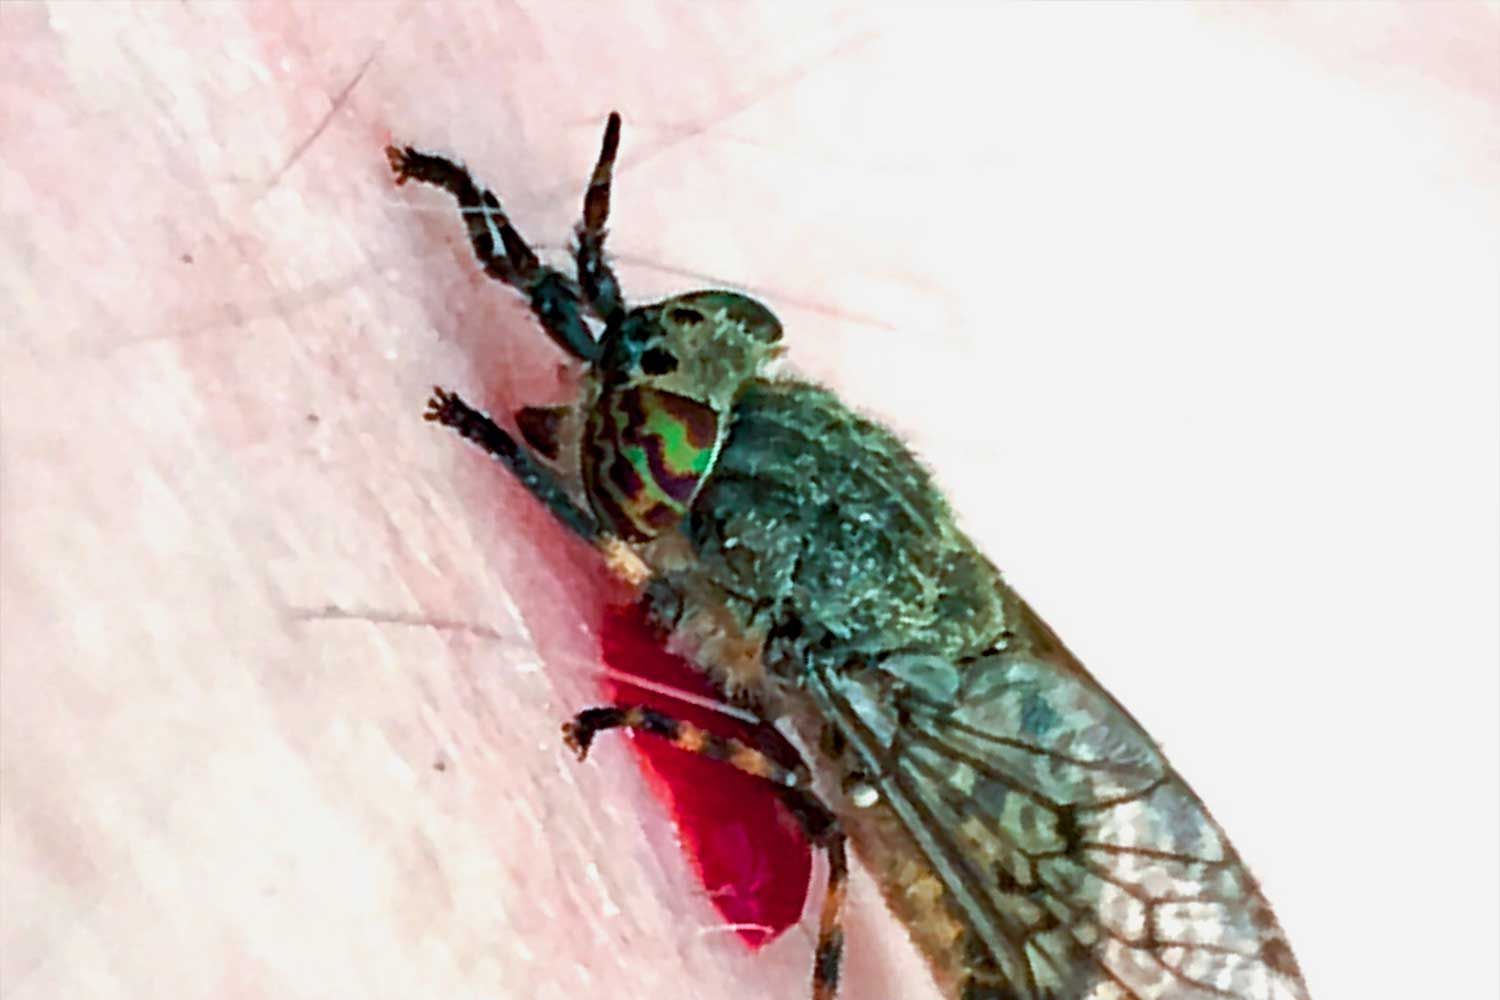 horse fly feeding on human host showing it biting and causing bleeding